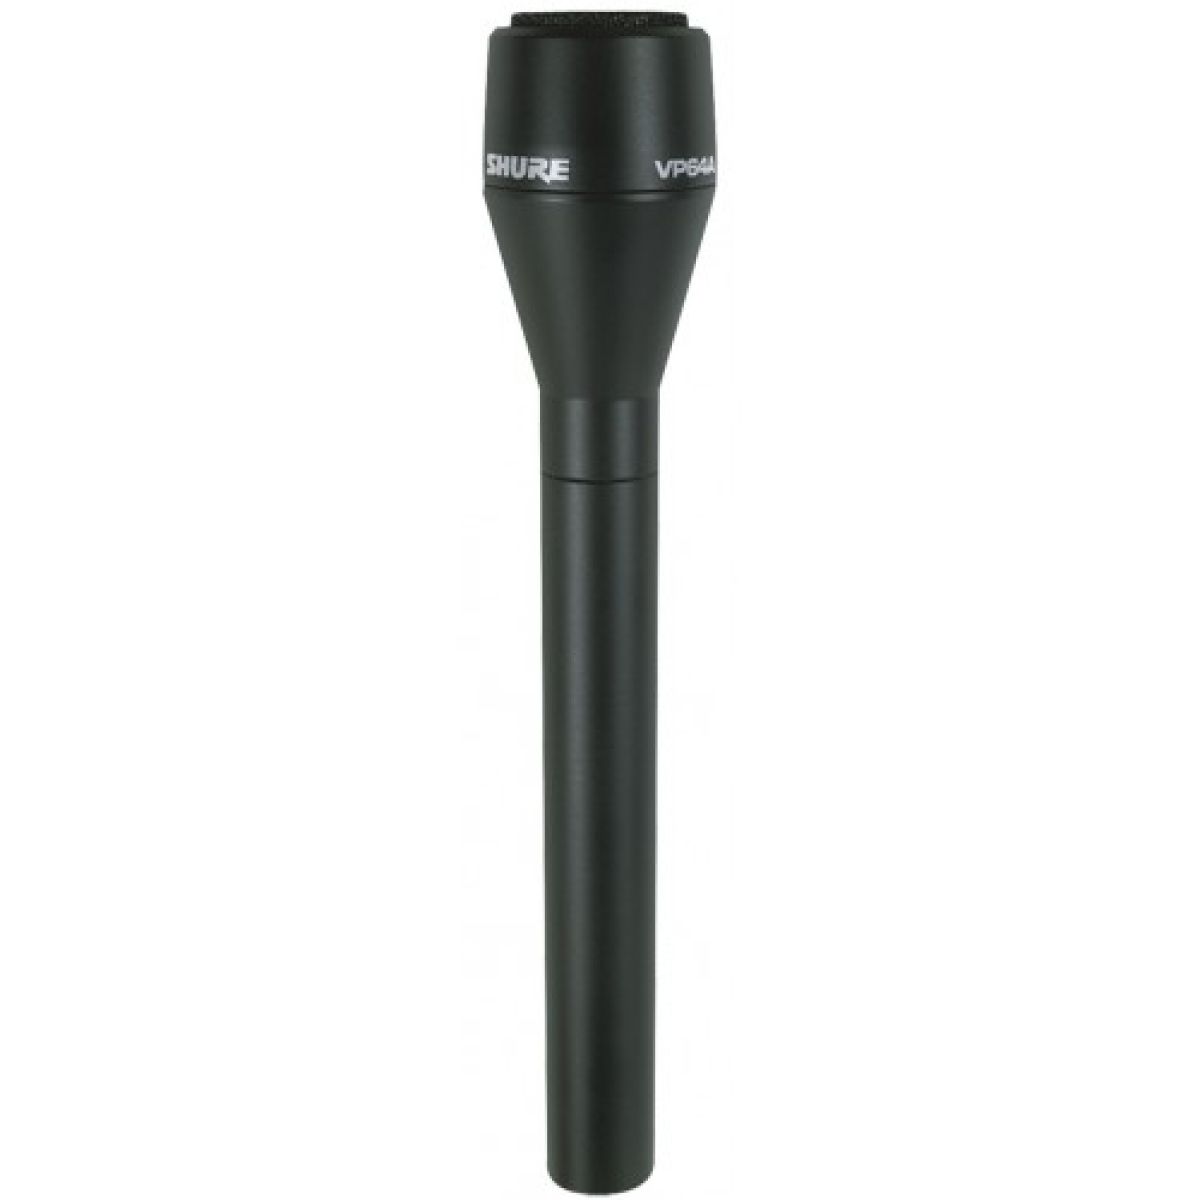 Shure VP64A Micro instrument